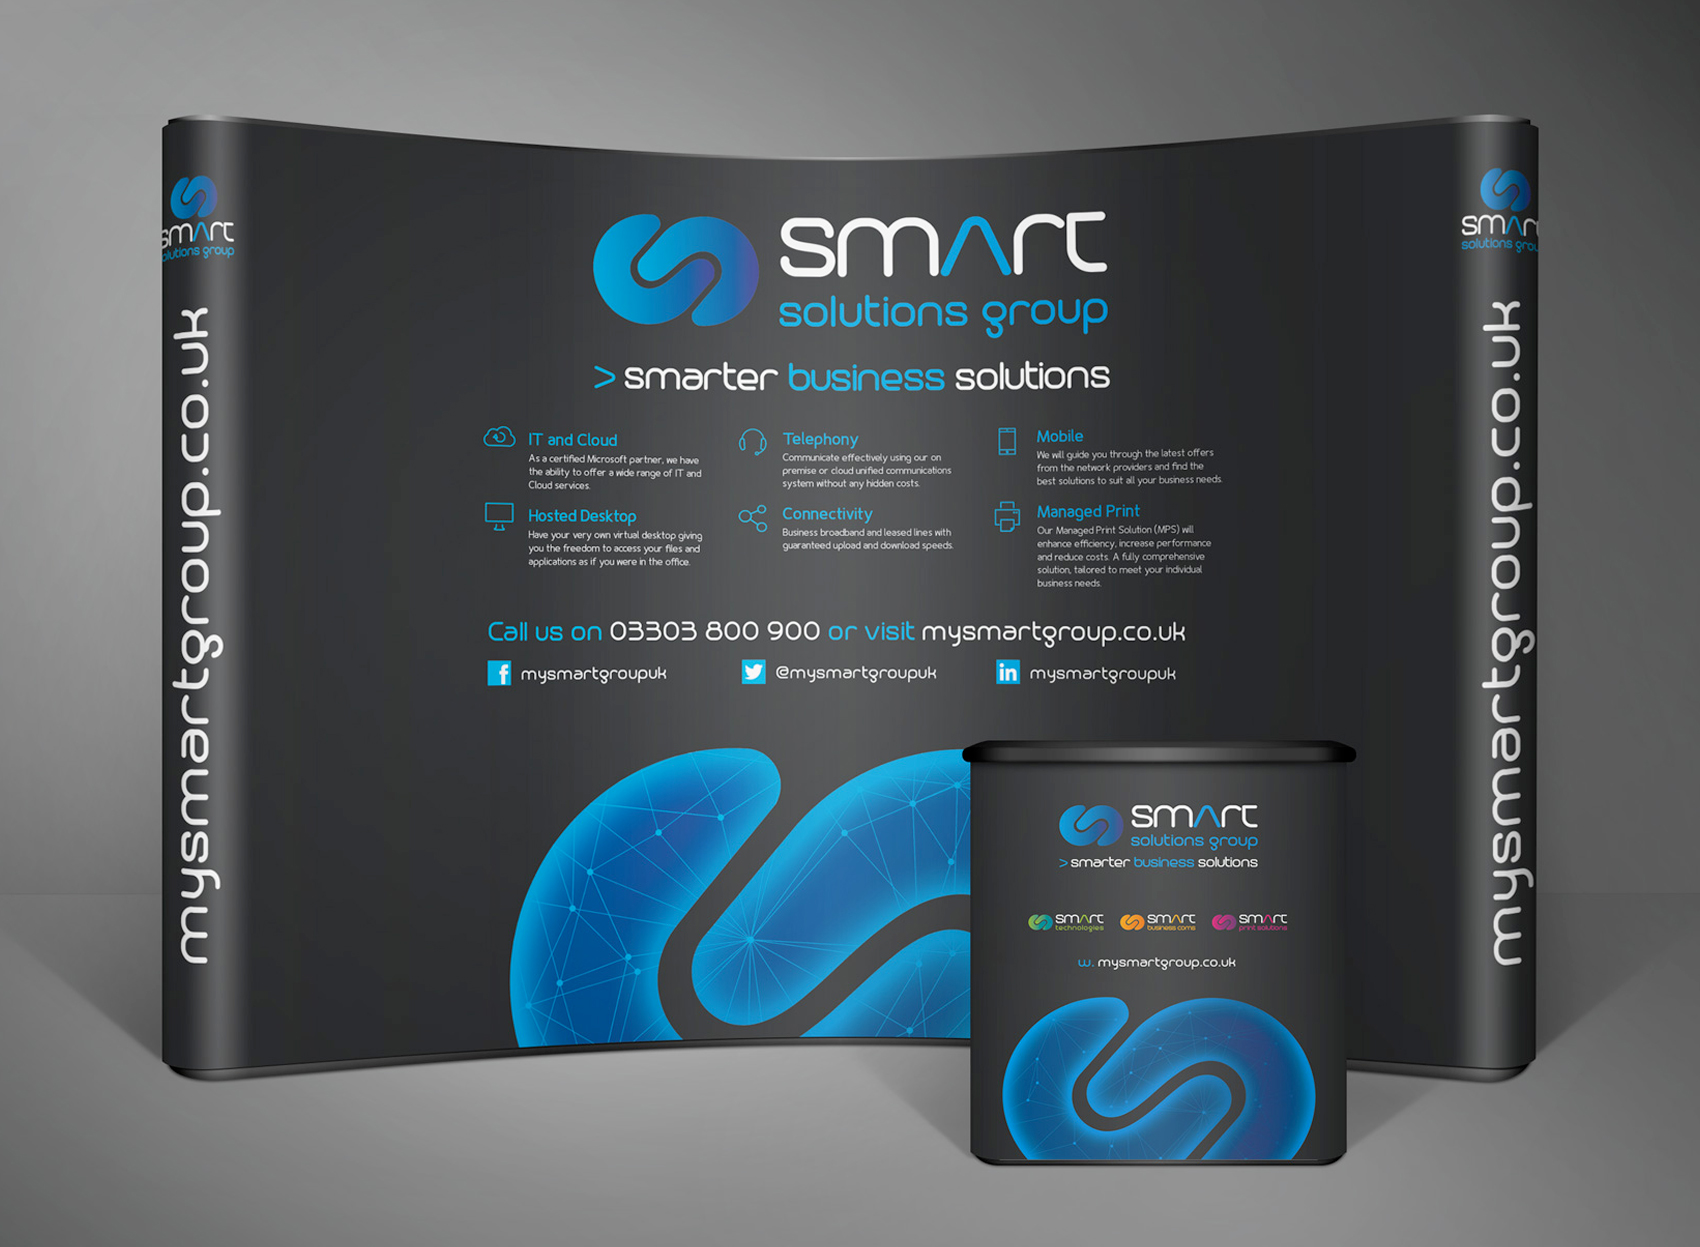 Smart Solution Group Exhibition Display